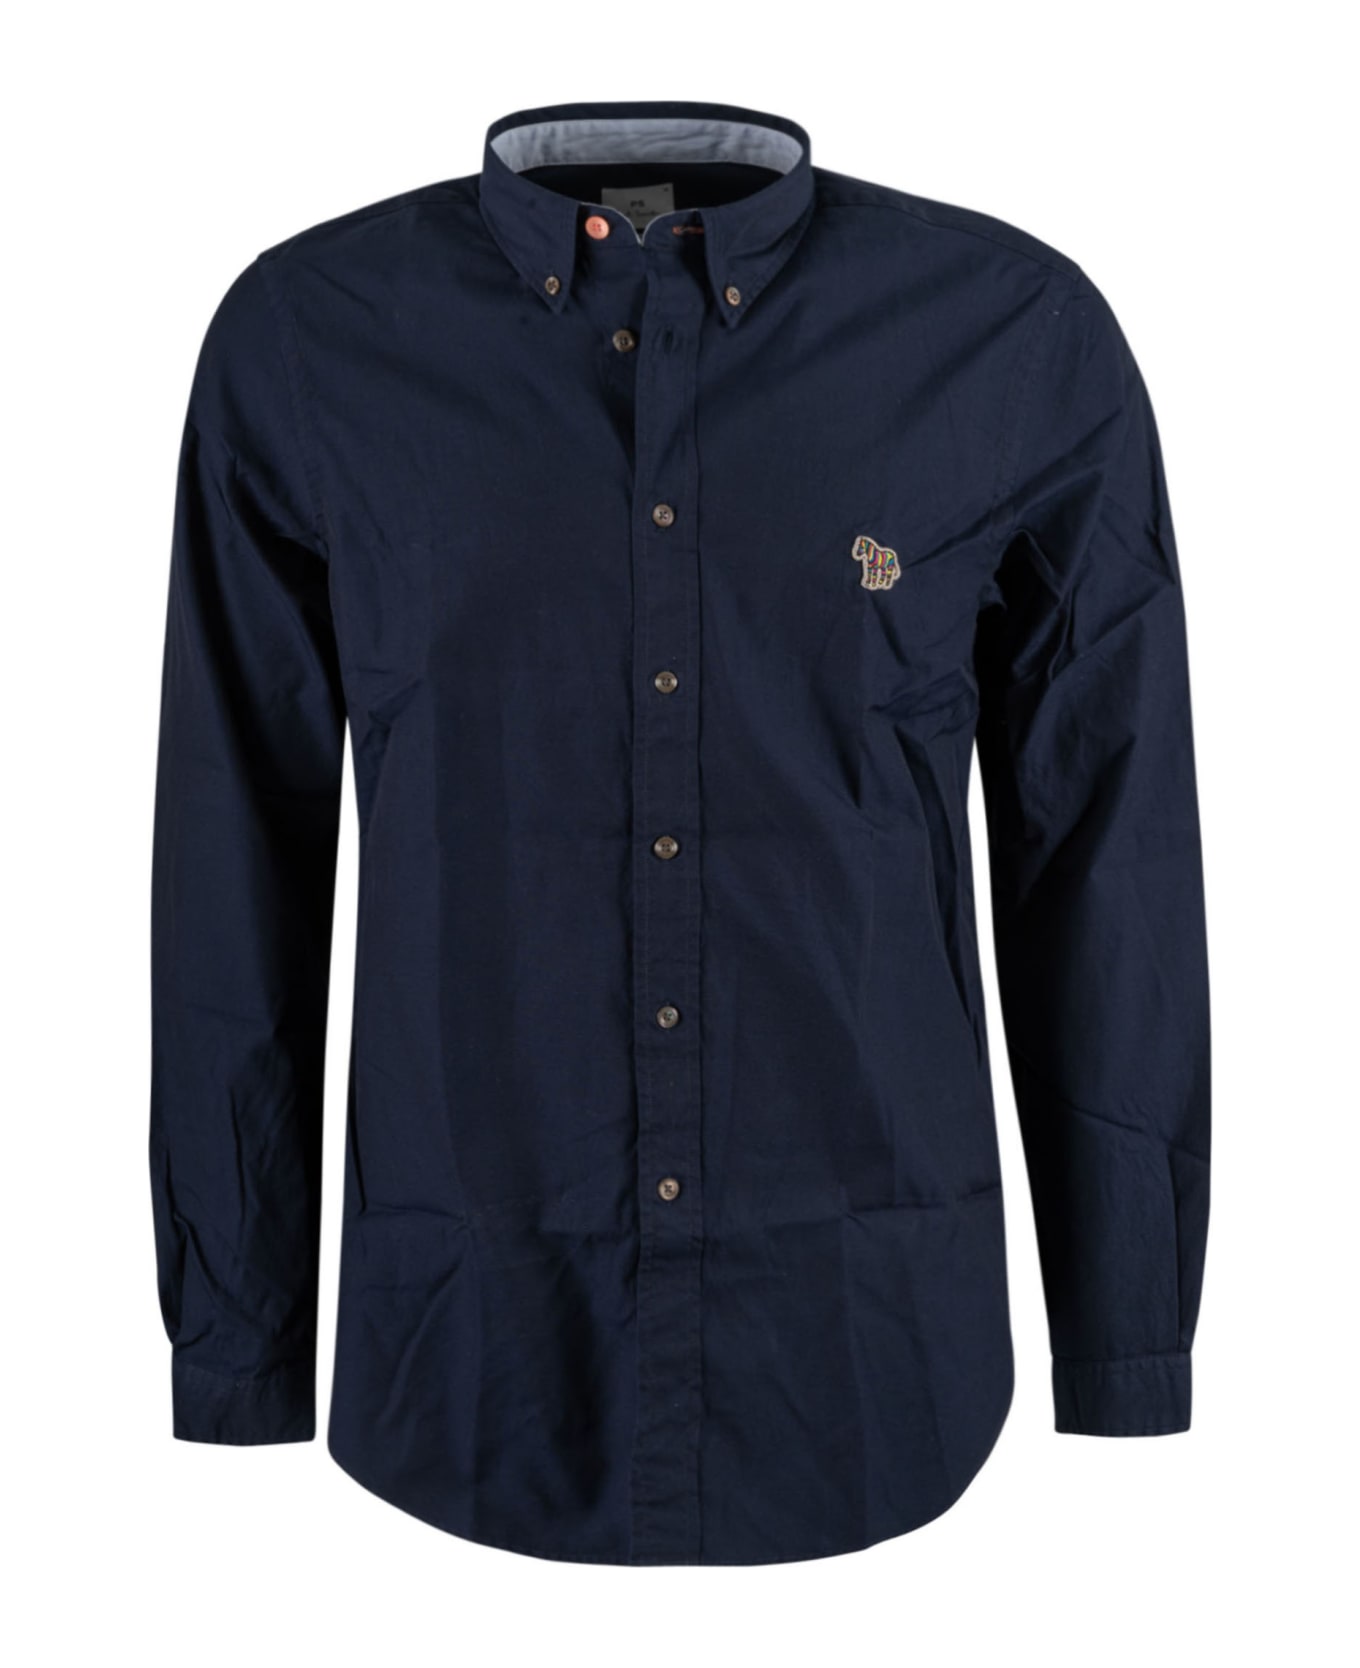 Paul Smith Tailored Bd Shirt - Inky シャツ